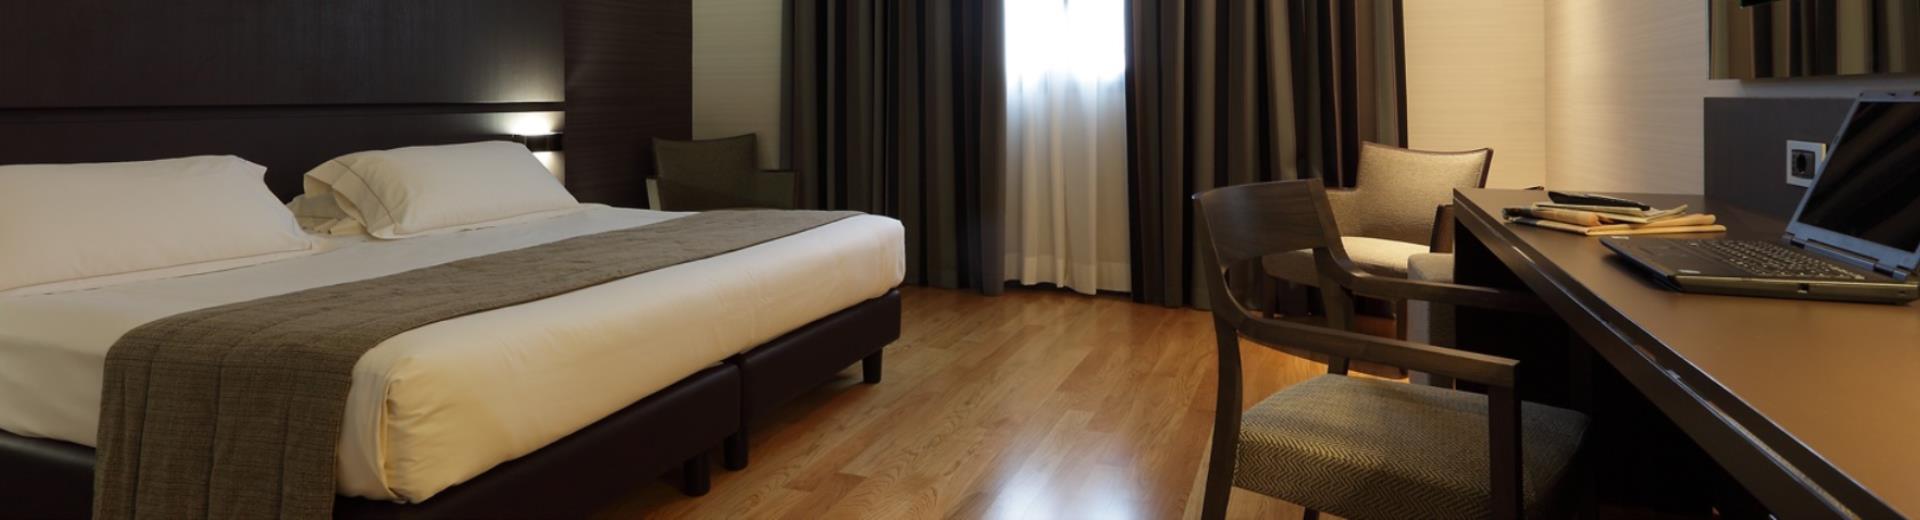 Residence formula for long stays near Milan at BW Plus Hotel Monza e Brianza Palace